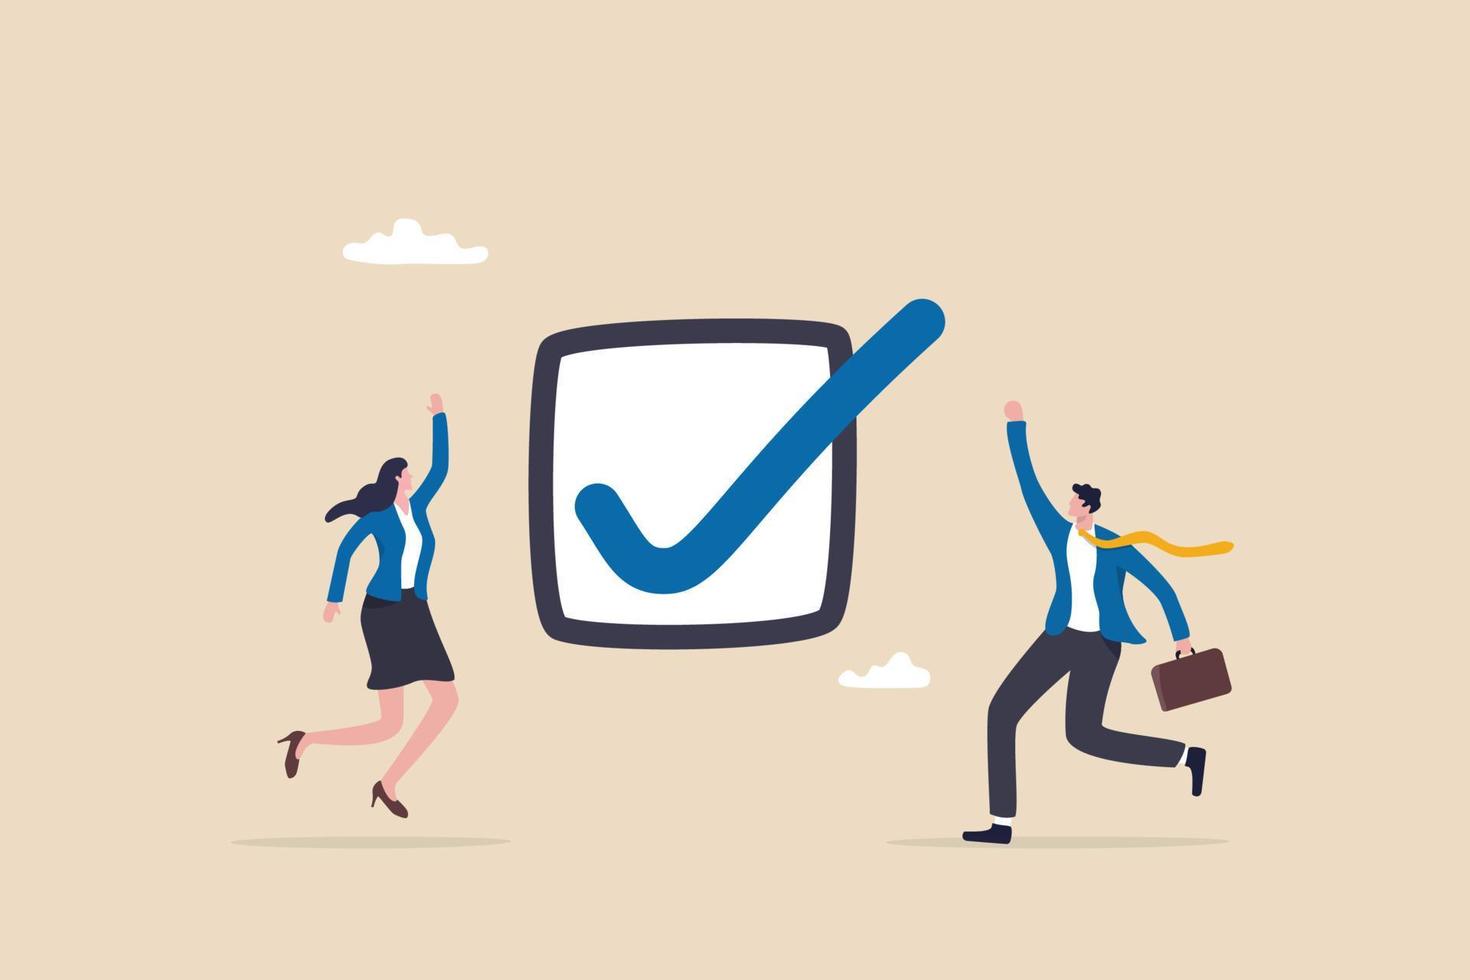 Complete task, accomplishment or project done checklist, success or achievement checkbox, job done concept, happy business people celebrate completed checkmark  after finish responsible project. vector